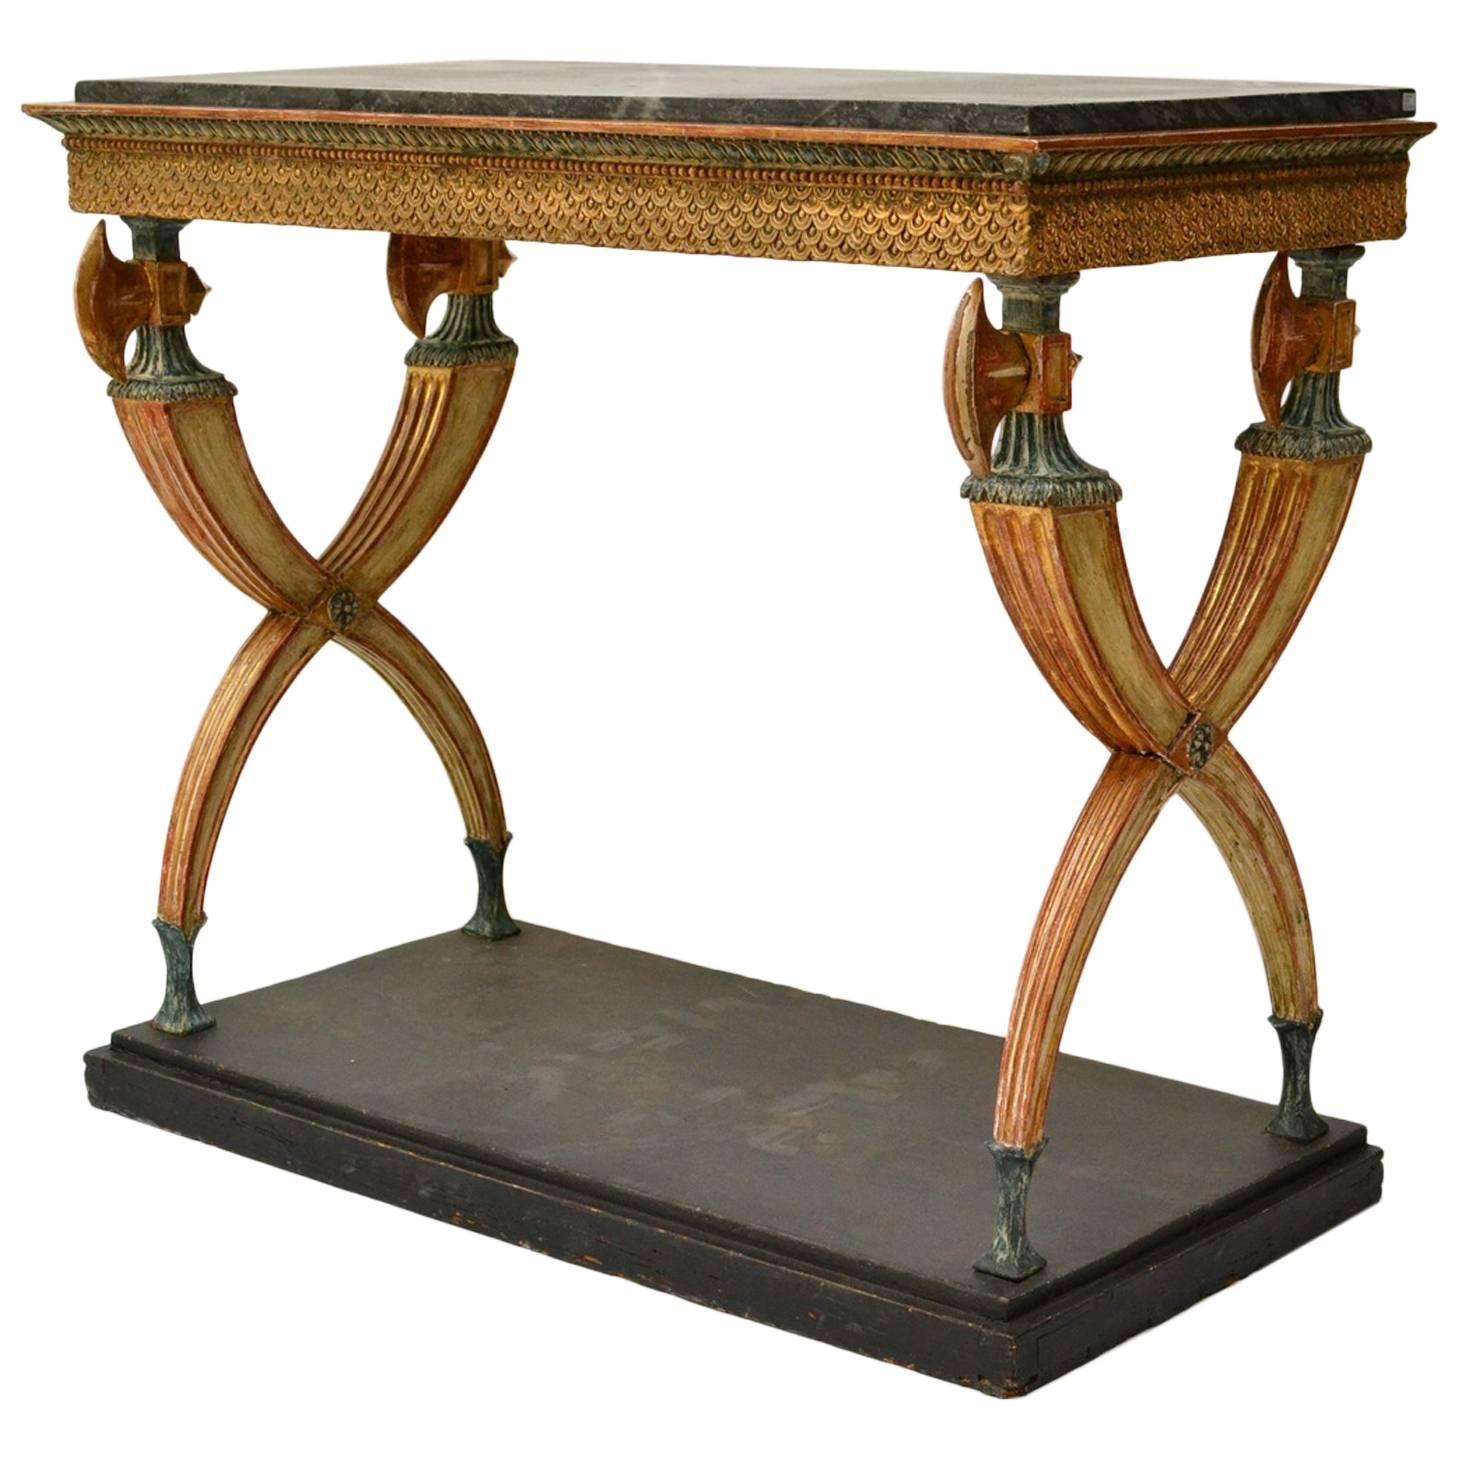 Swedish Empire Gilded and Patinated Wood Console Table with a Marble Top